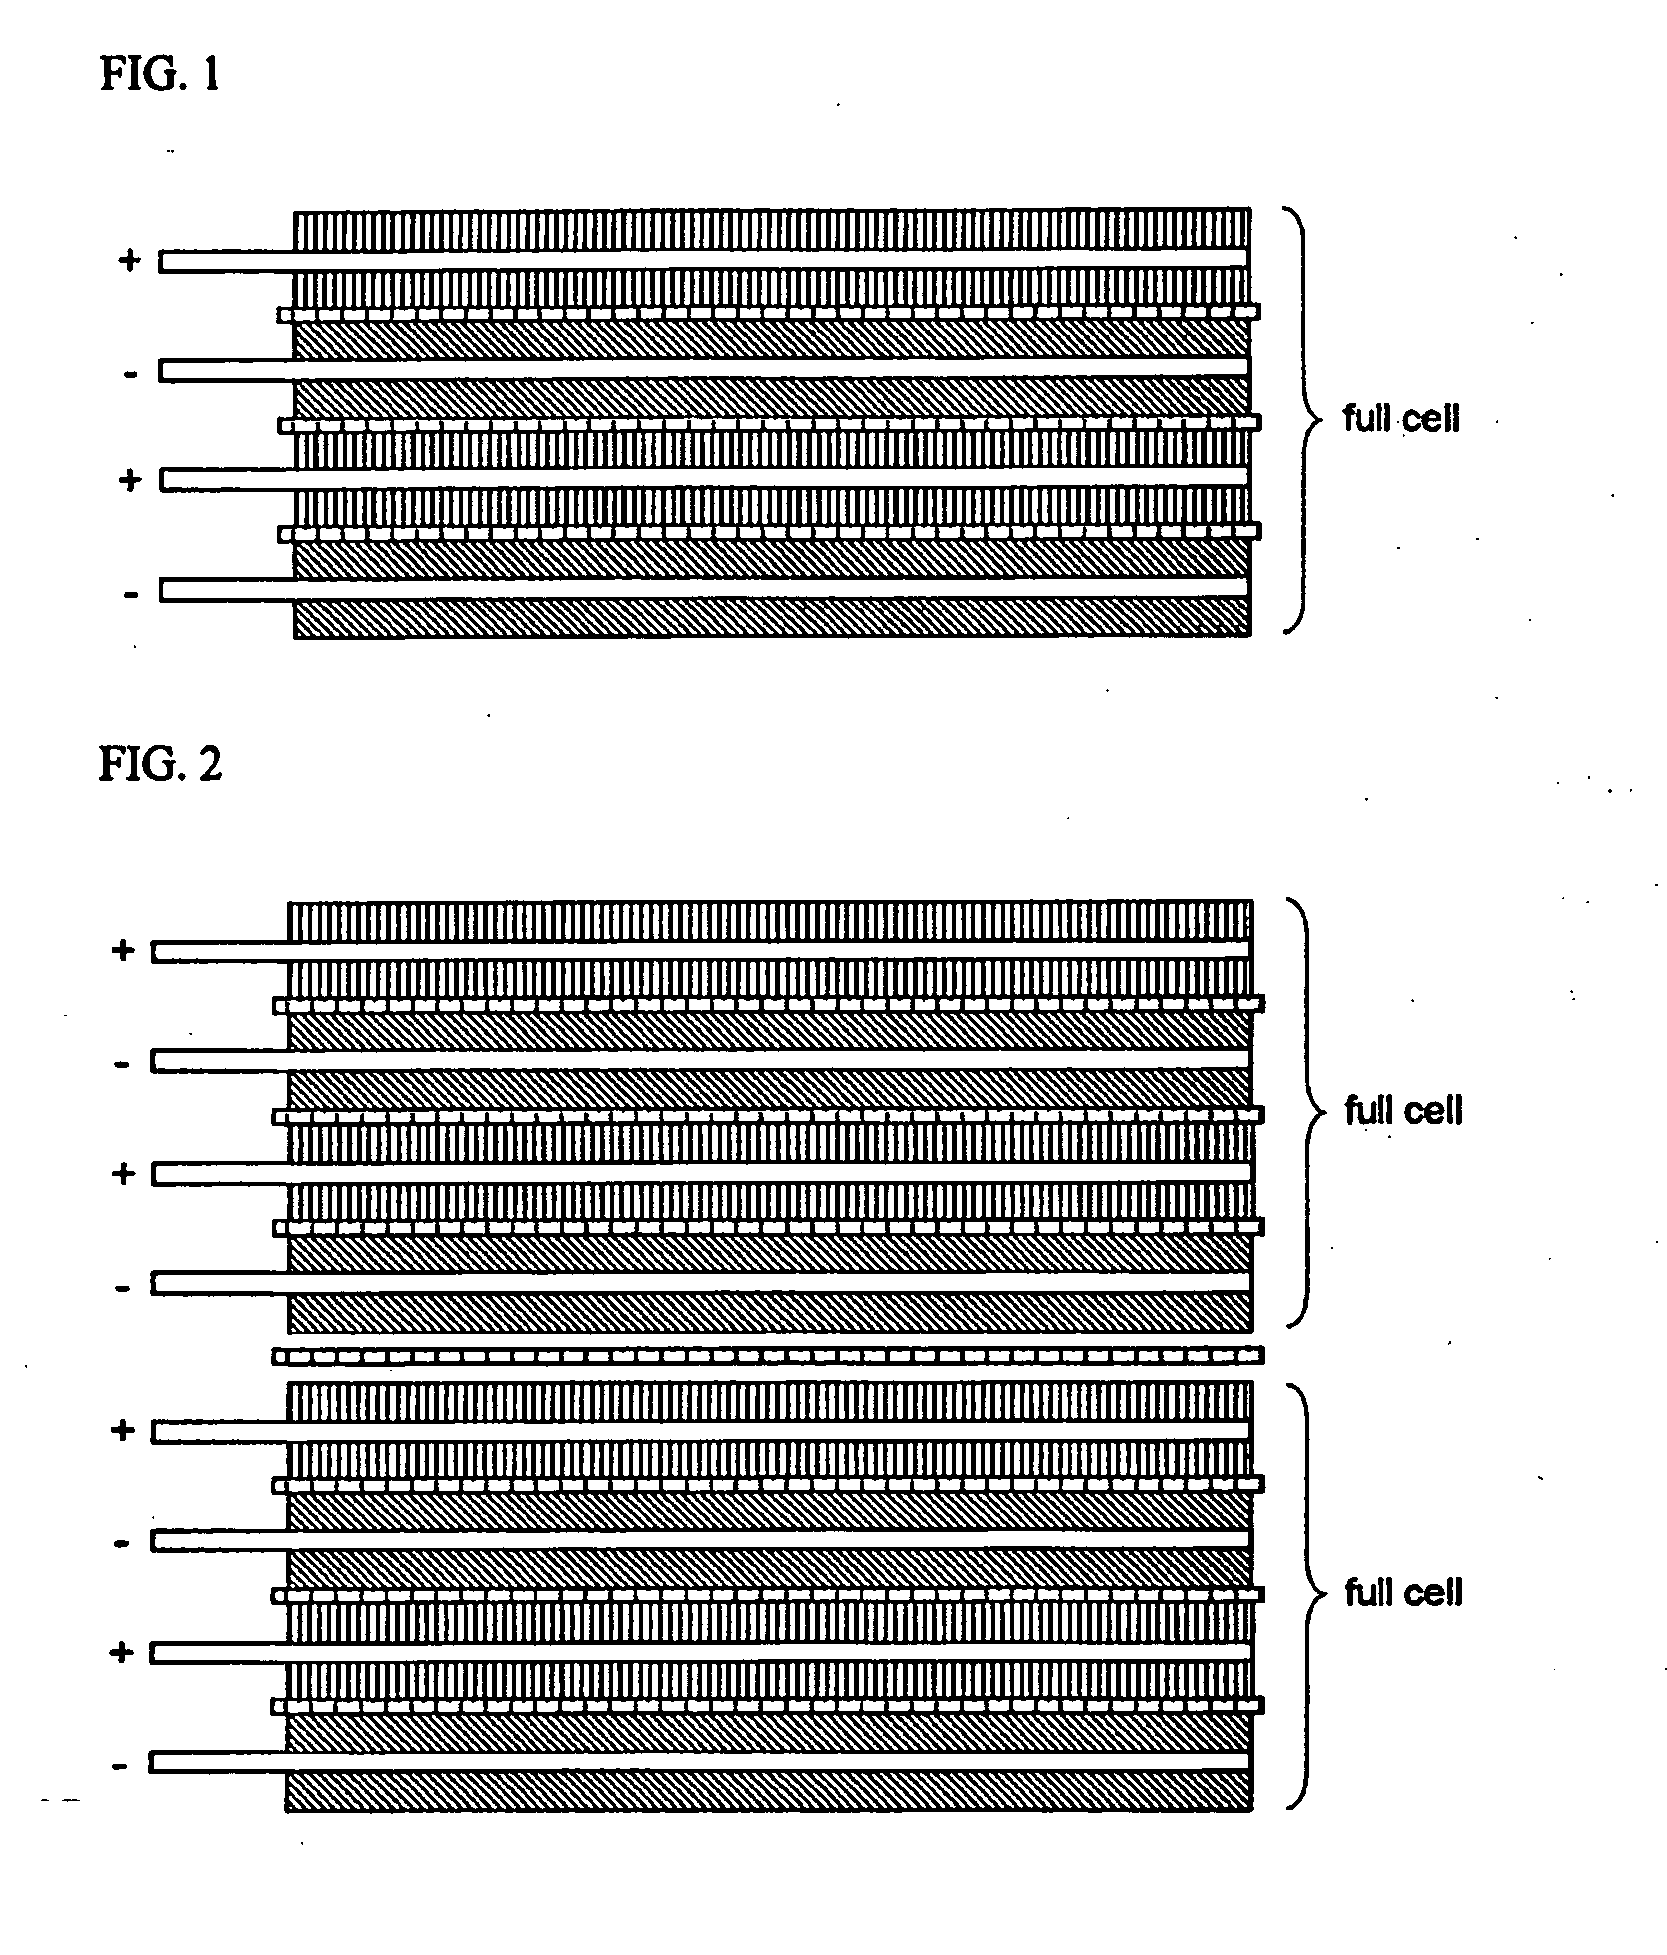 Stacking-typed secondary battery providing two or more operation voltages